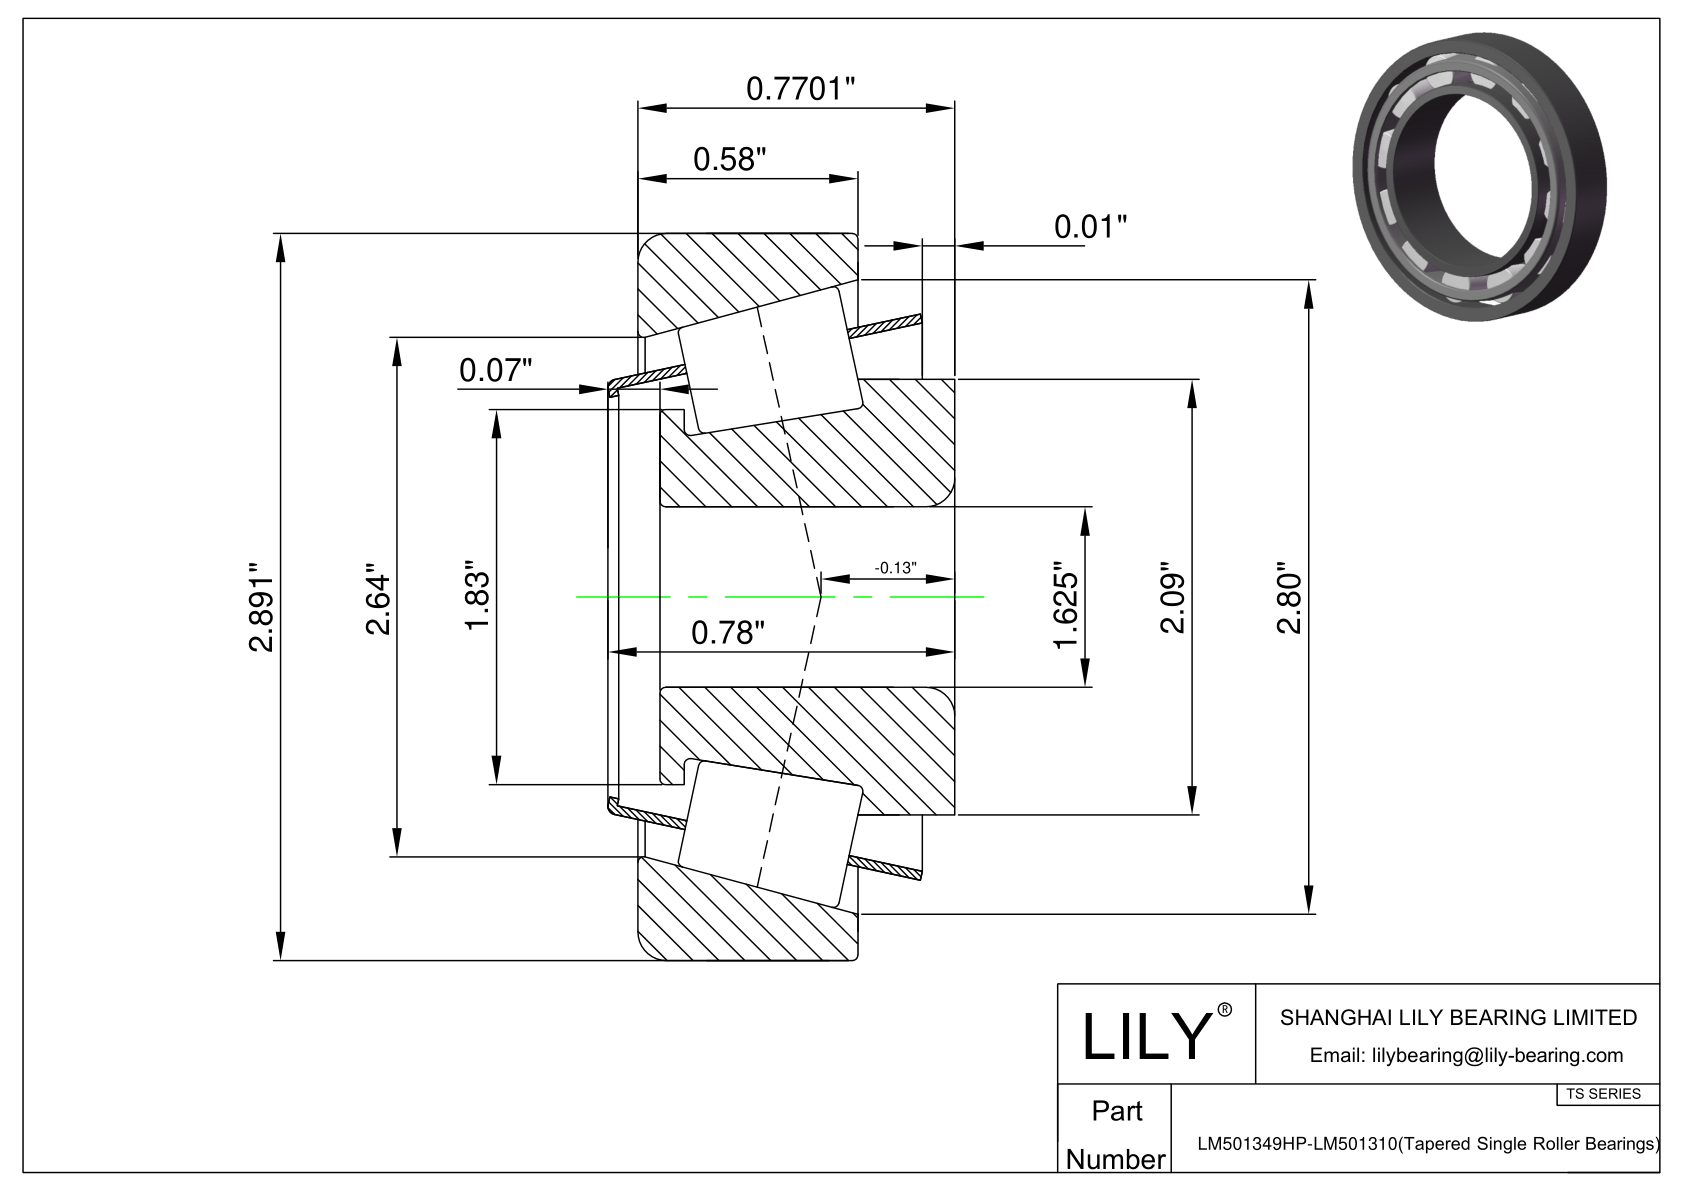 LM501349HP-LM501310 TS (Tapered Single Roller Bearings) (Imperial) cad drawing